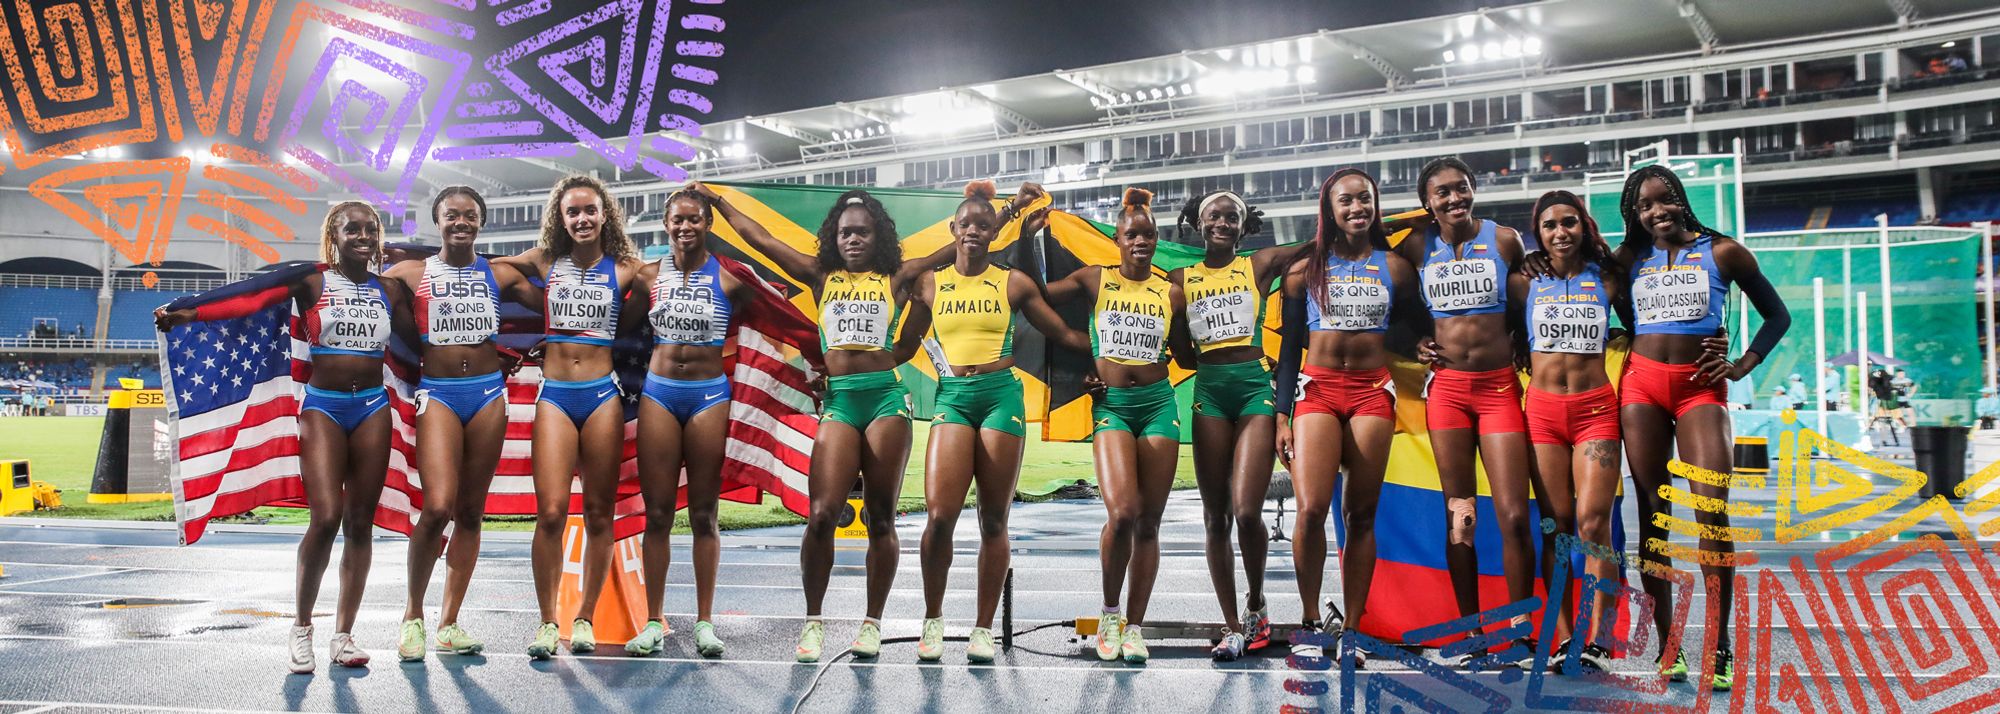 On an evening when lightning bolts filled the sky, a horde of young Jamaican women brought their own electrical storm to the Pascual Guerrero Stadium